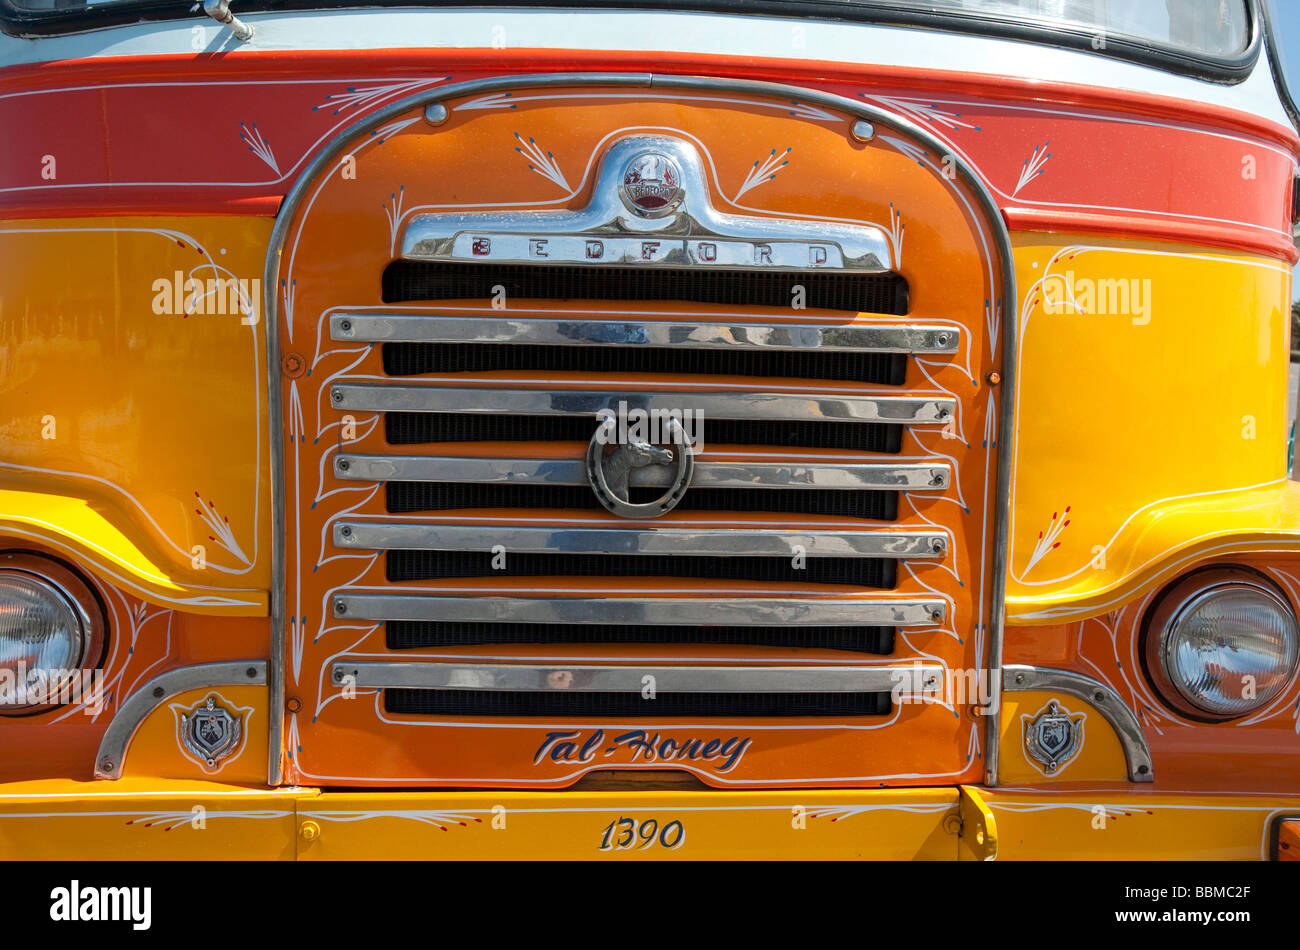 Radiator grille, typical old bus, Malta Stock Photo - Alamy